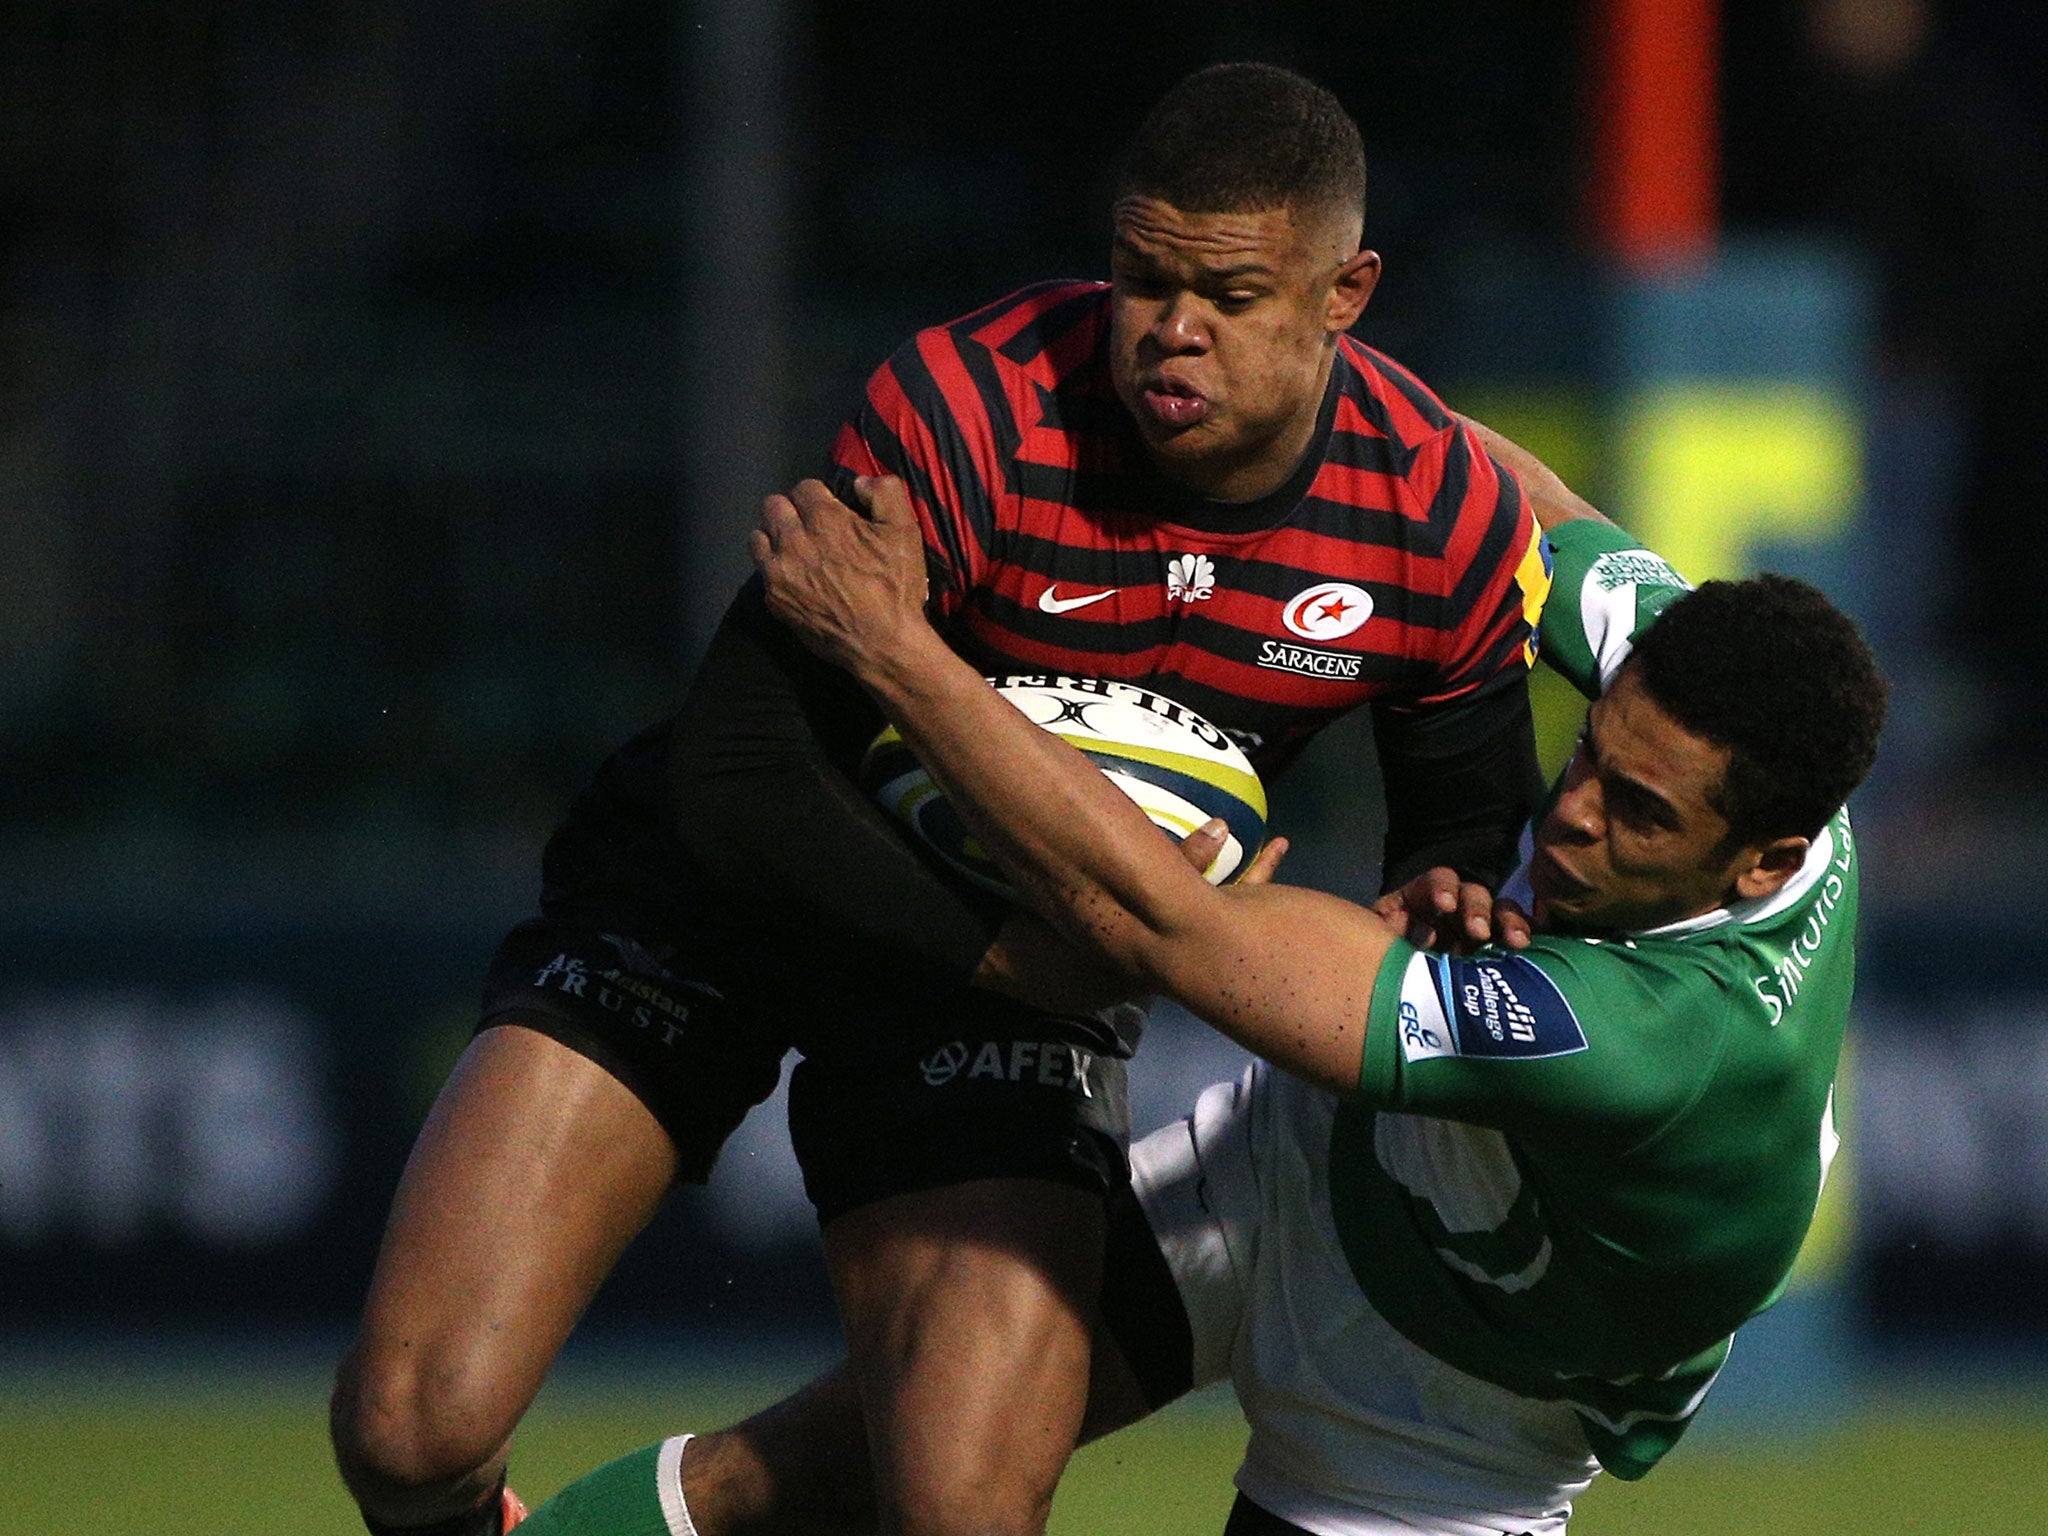 Saracens' Nathan Earle is held by Zach Kibirige during the game on Sunday